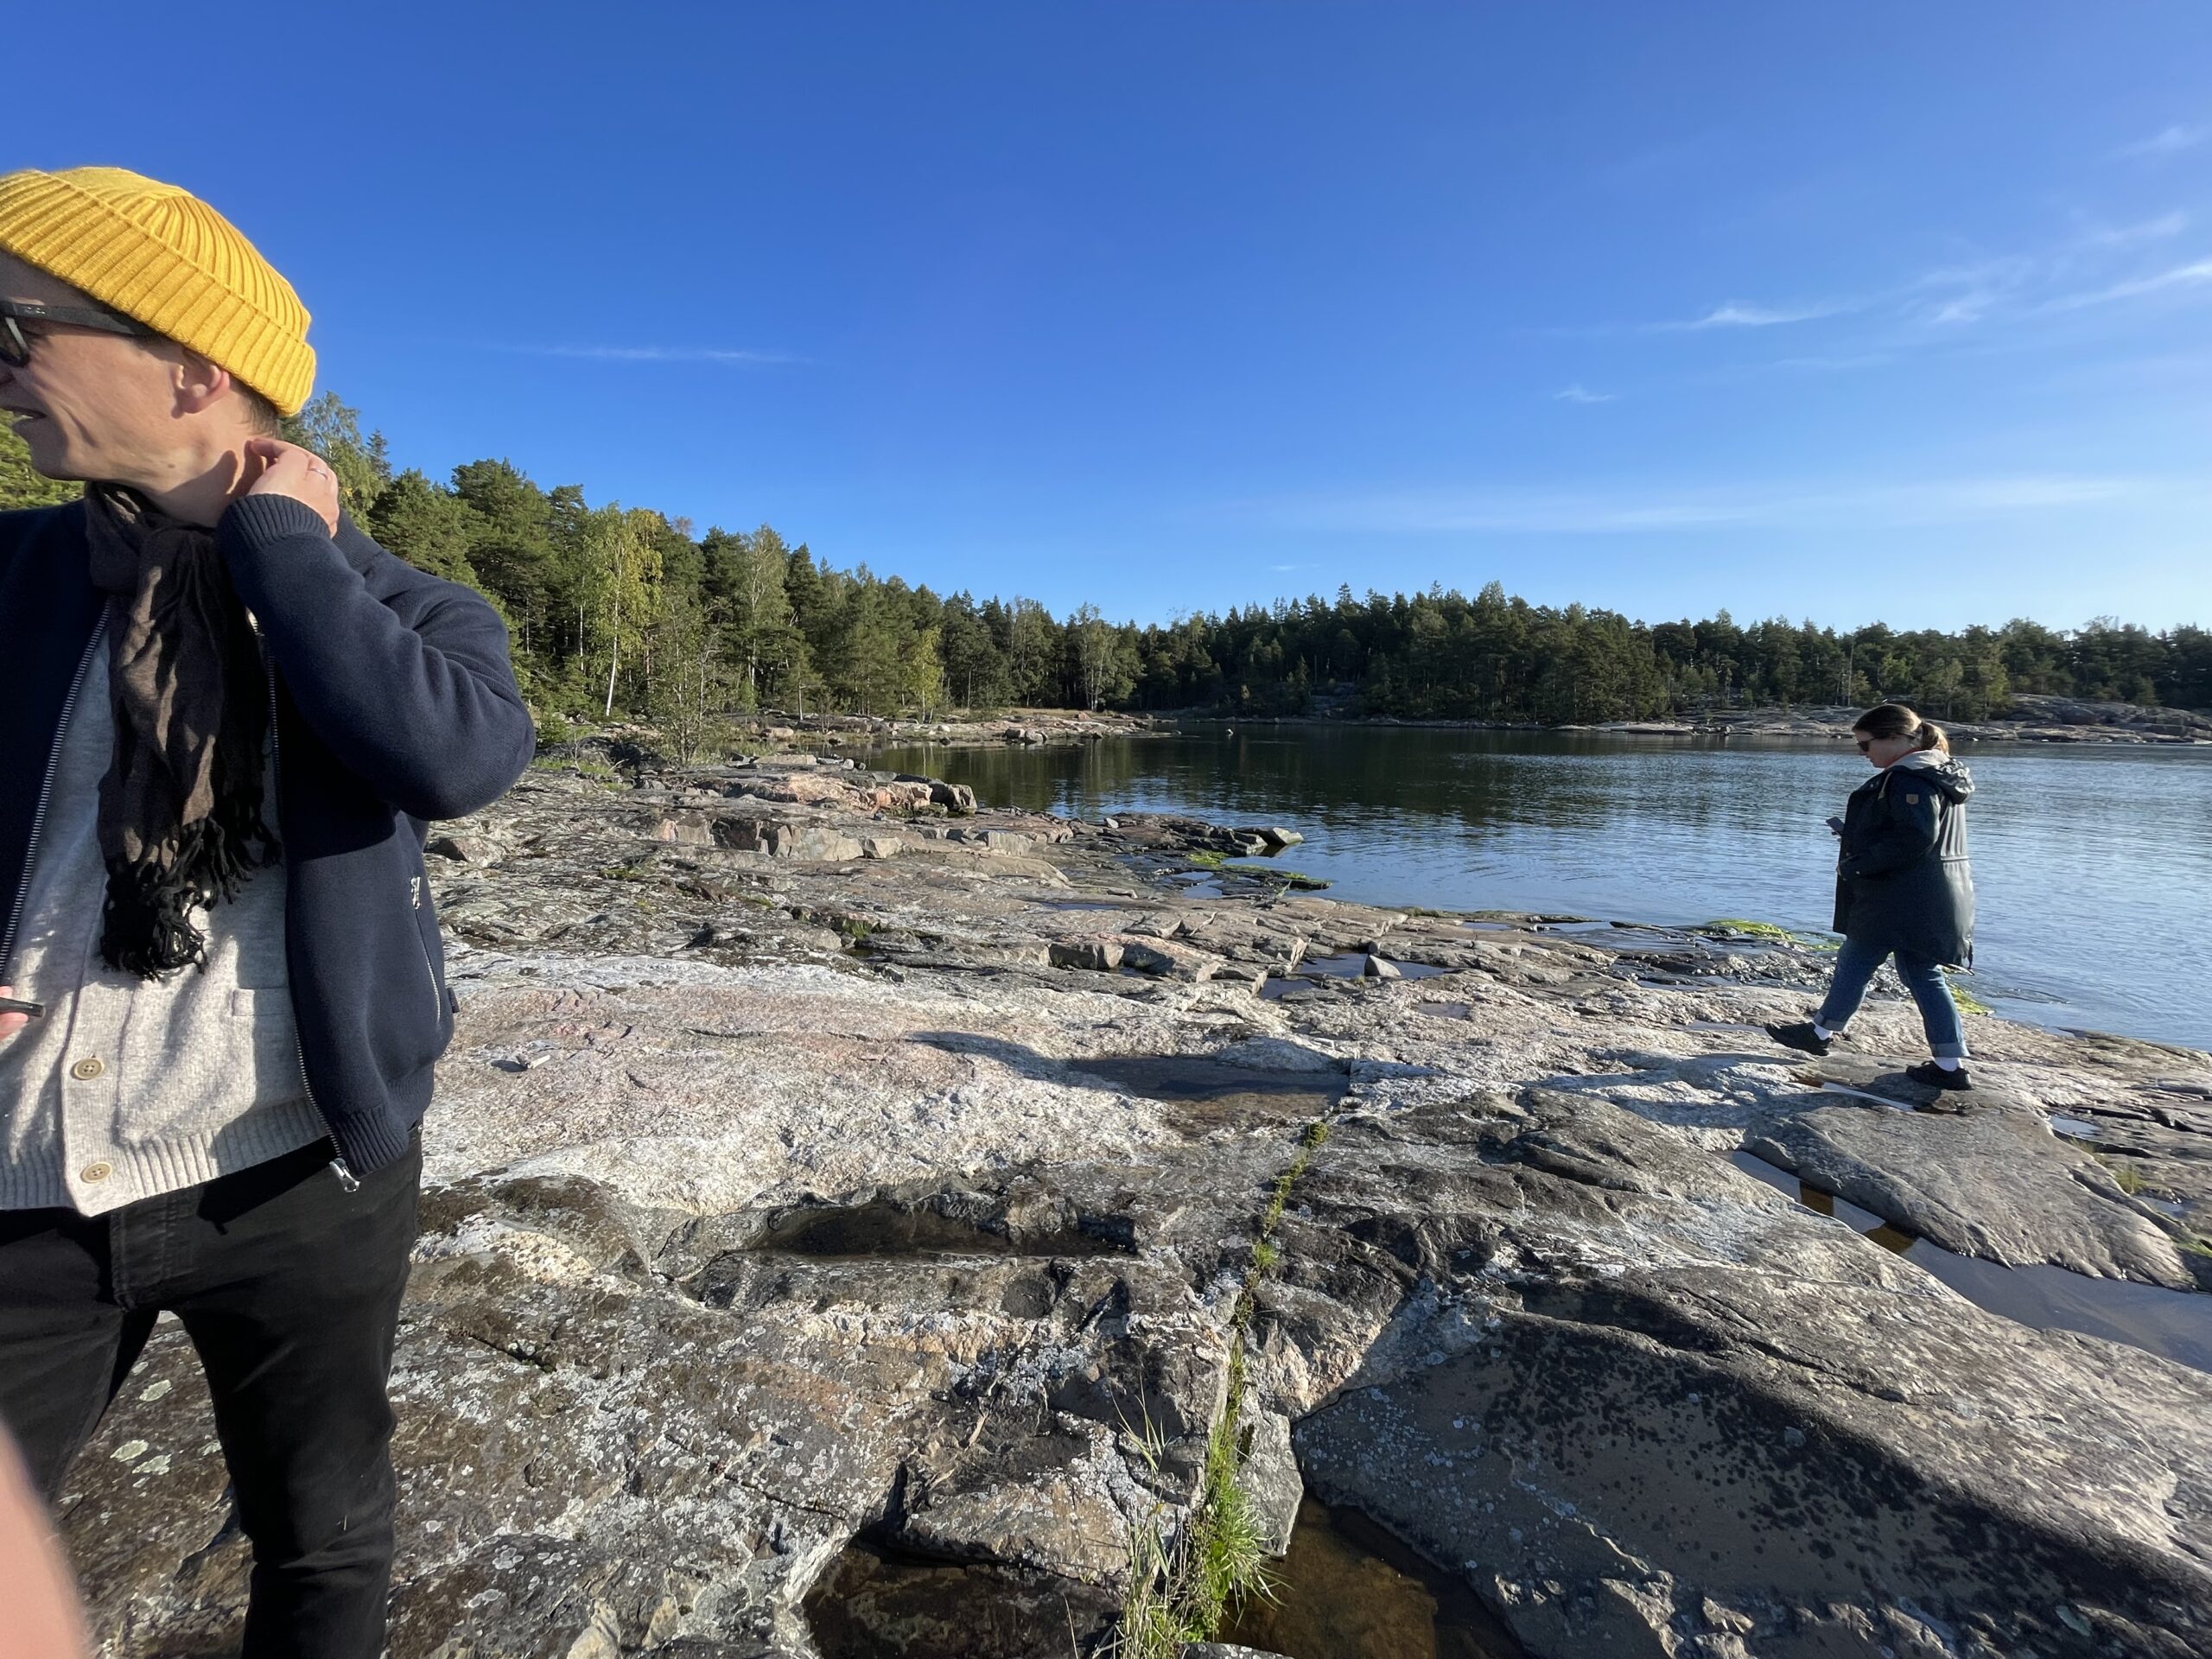 The Europan 17 Finland jury visiting the competition site on the Vaskiluoto Island in Vaasa